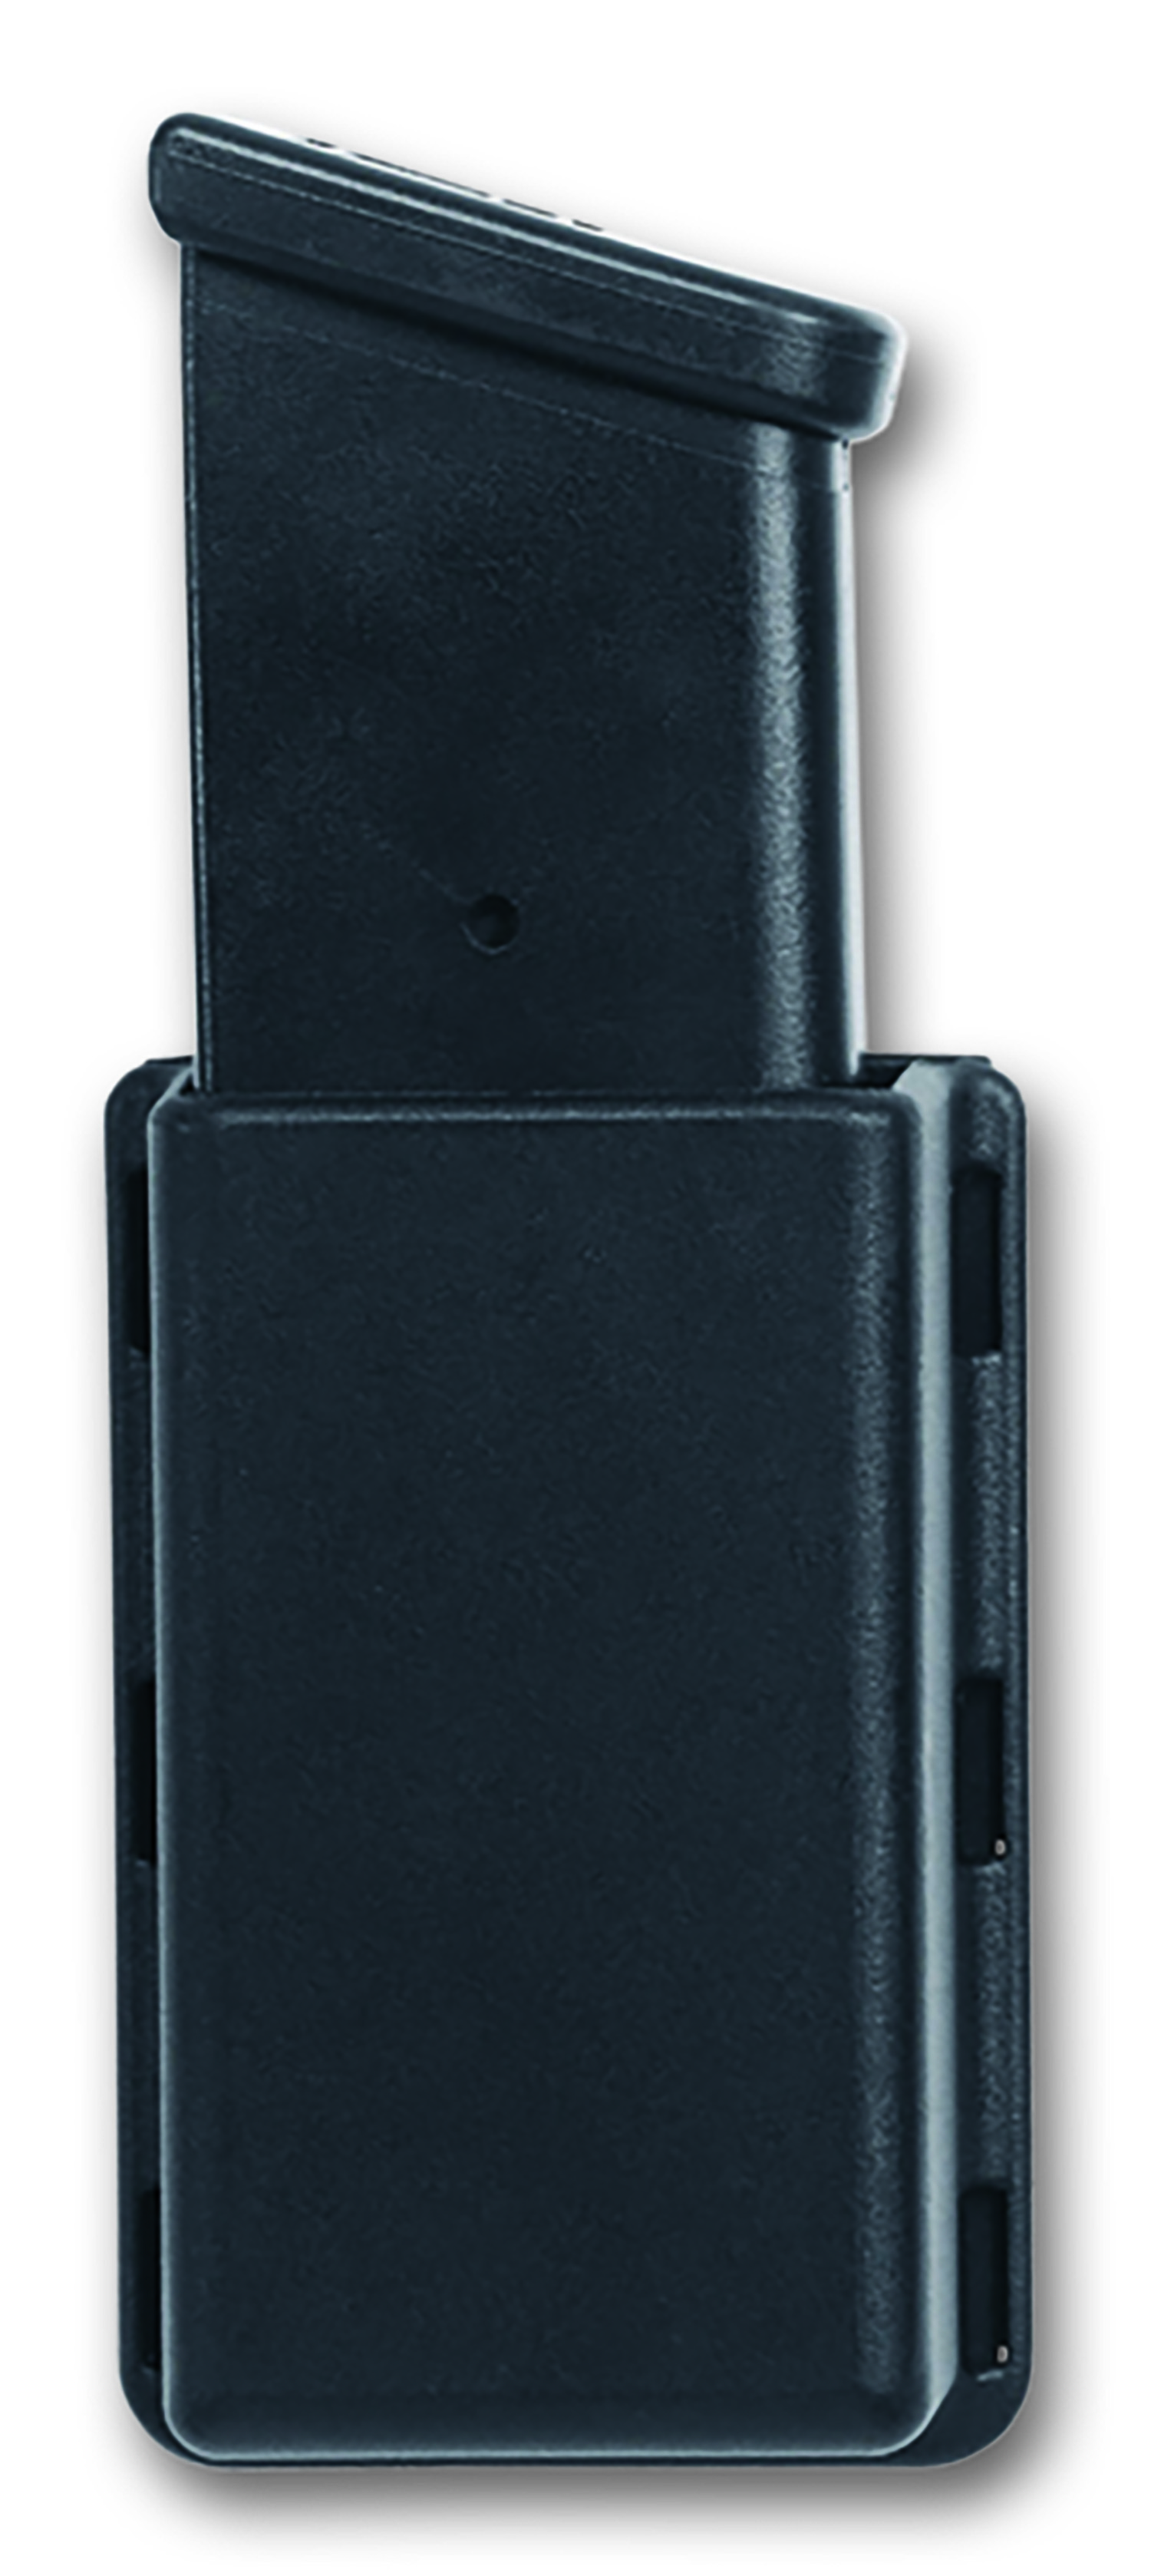 Uncle Mikes 50362 Kydex Single Mag Case with Black Finish & Drain Hole for 9mm Luger & 40 S&W Mags